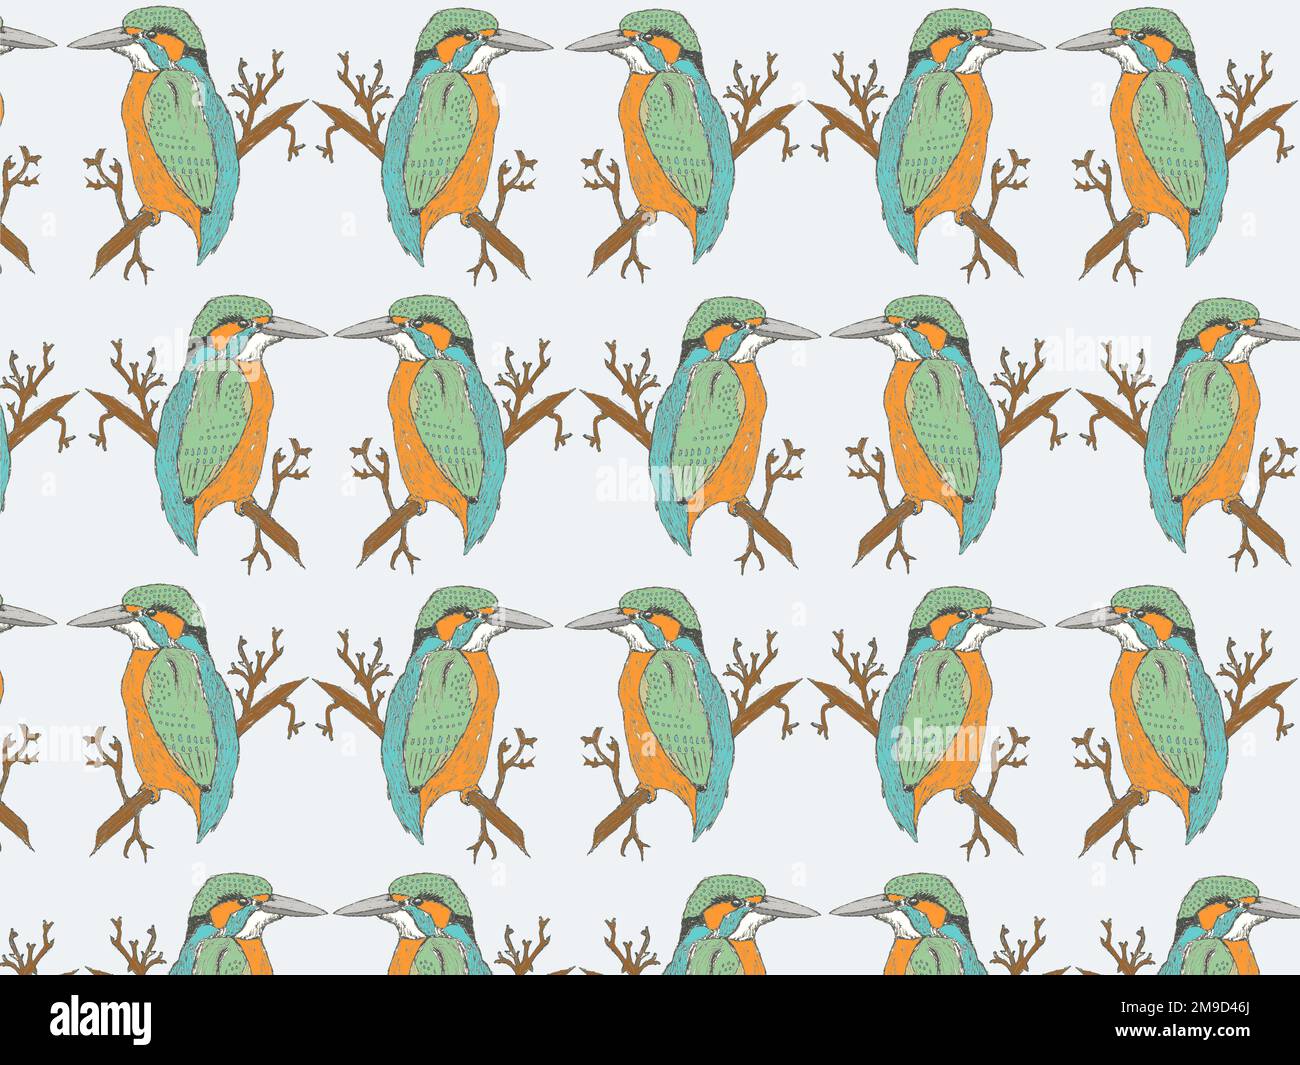 Kingfisher on a branch repeating pattern. Stock Photo